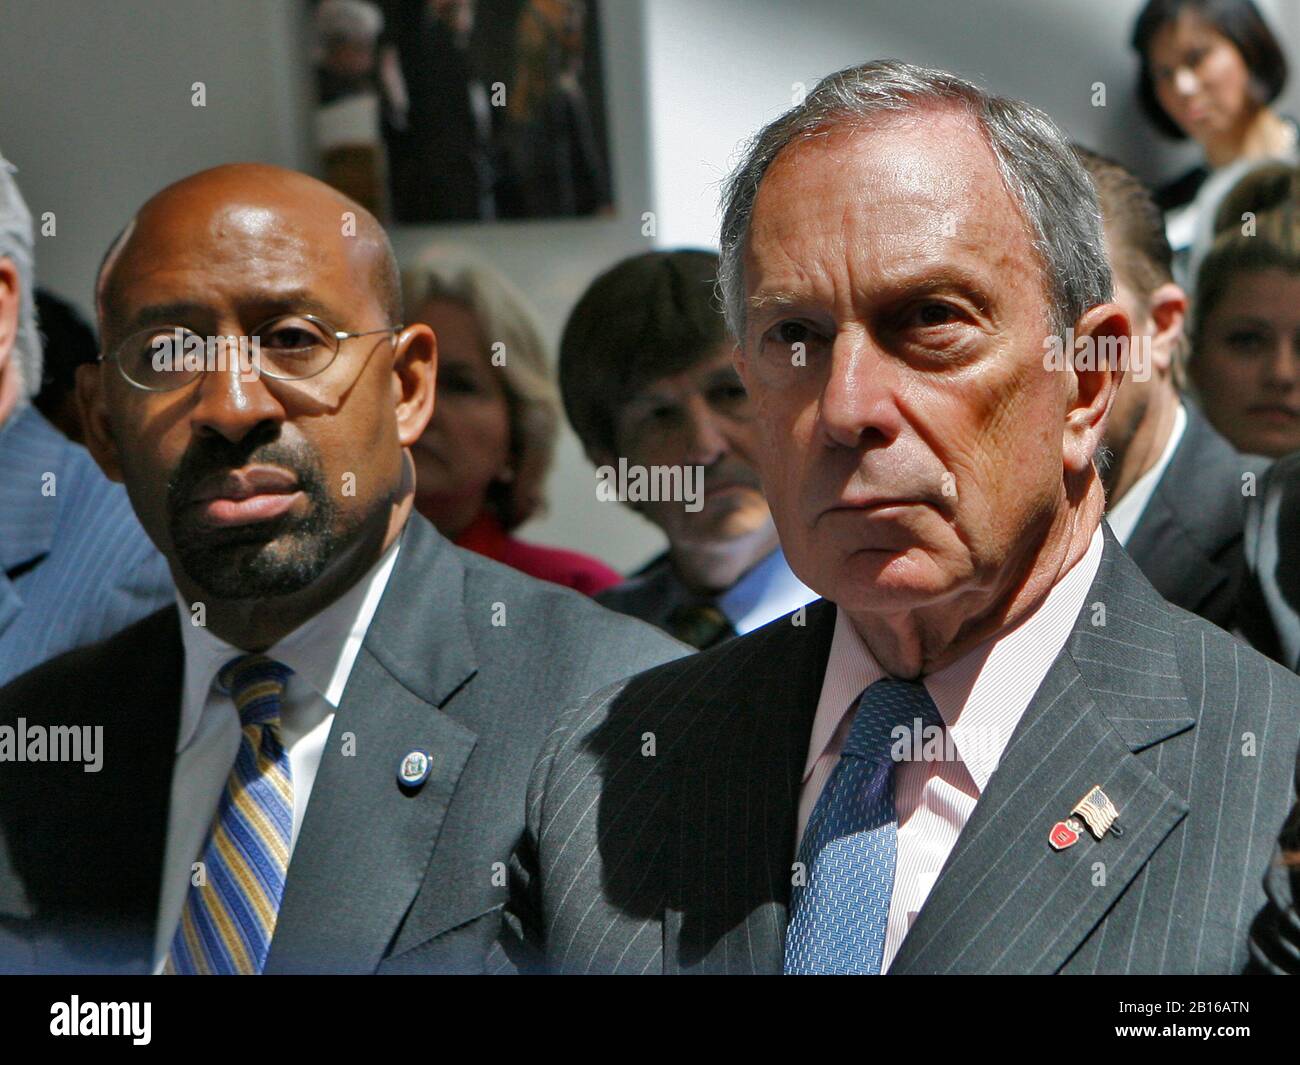 Mayors Michael Nutter of Philadelphia, Pennsylvania, left, and Michael Bloomberg of New York, New York  listen as United States President Barack Obama makes a speech about immigration reform at American University on Thursday, July 1, 2010. .Credit: CNP /MediaPunchP Stock Photo